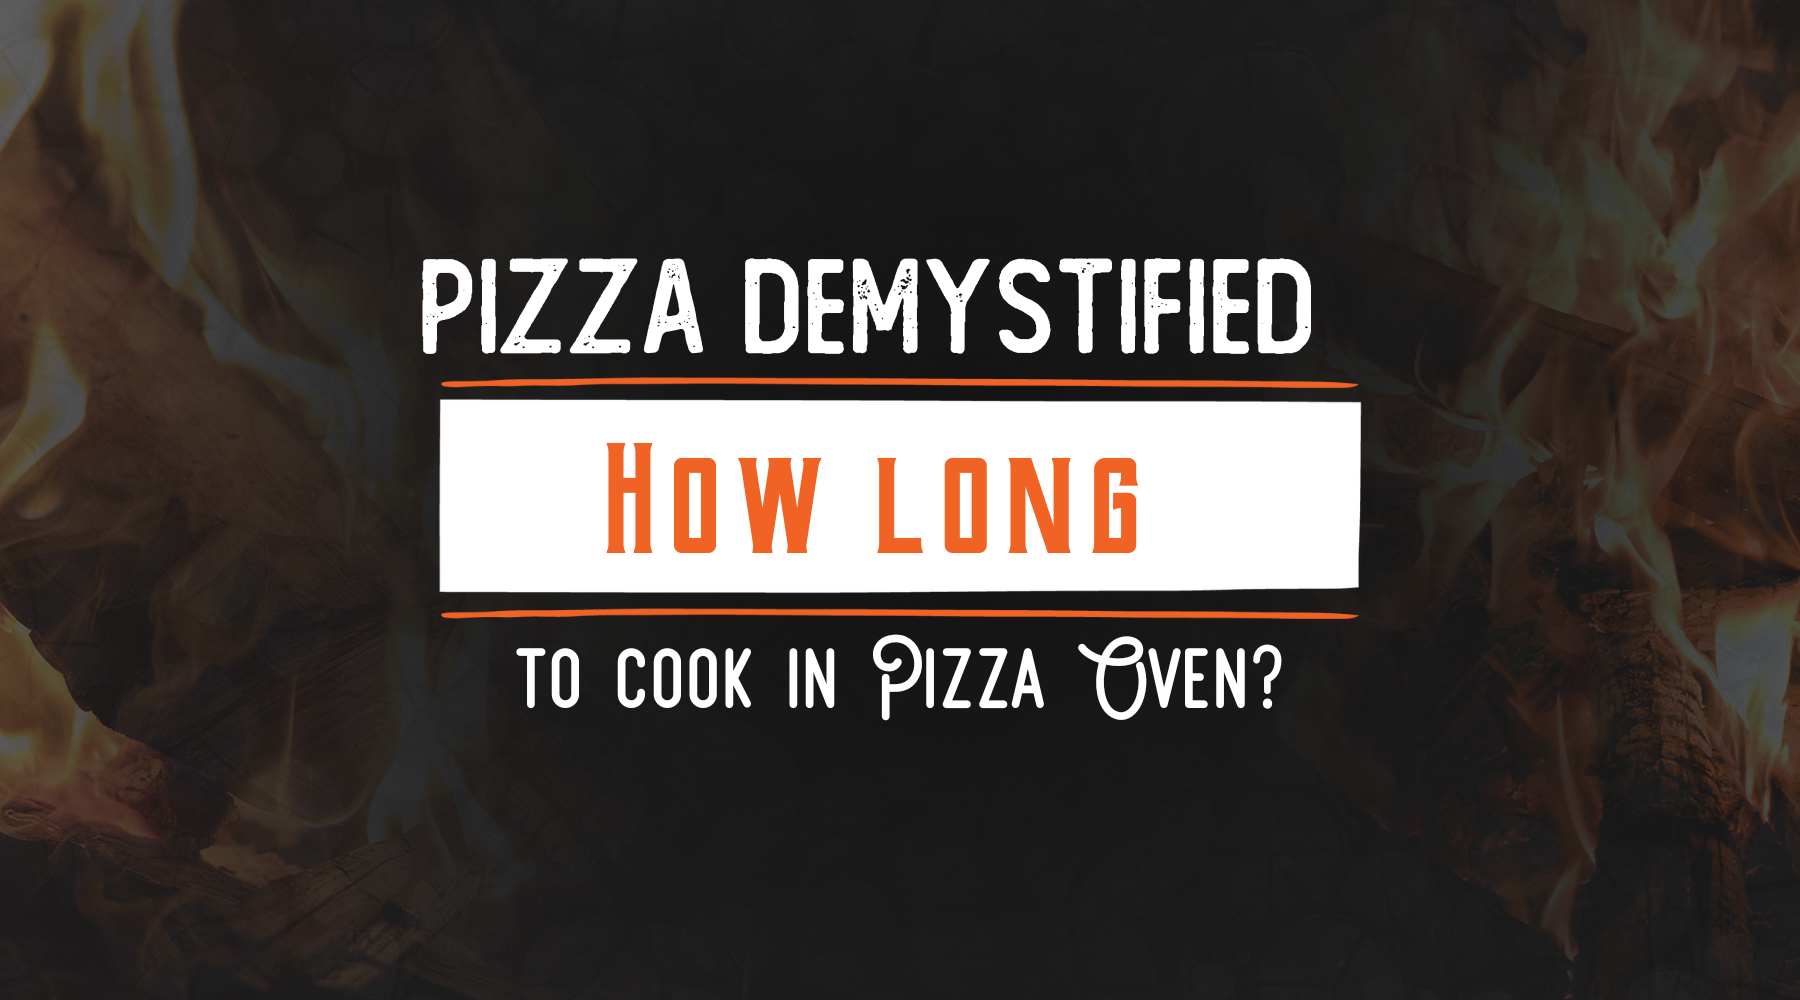 Pizza Demystified: How Long to Cook Pizza in Oven